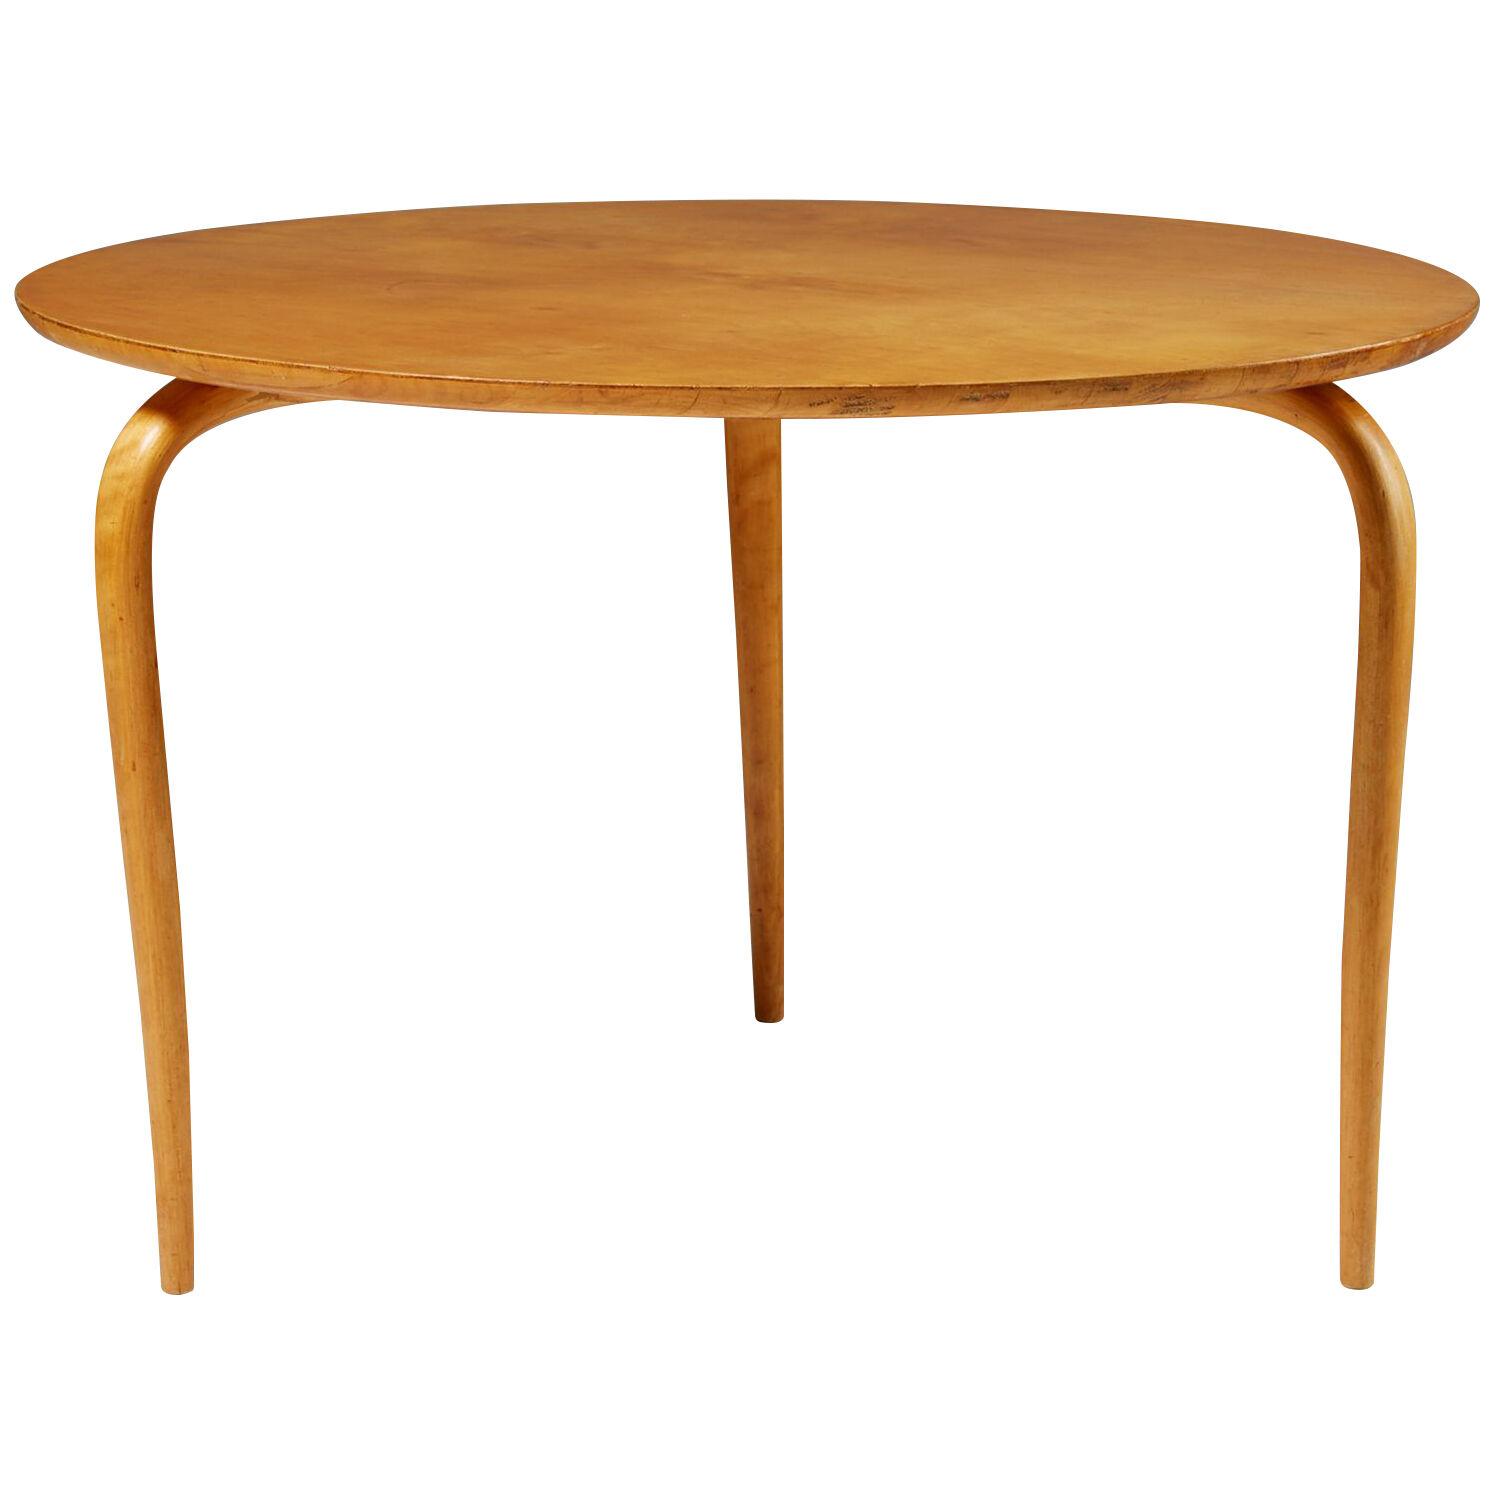 Occasional table Annika designed by Bruno Mathsson for Karl Mathsson,